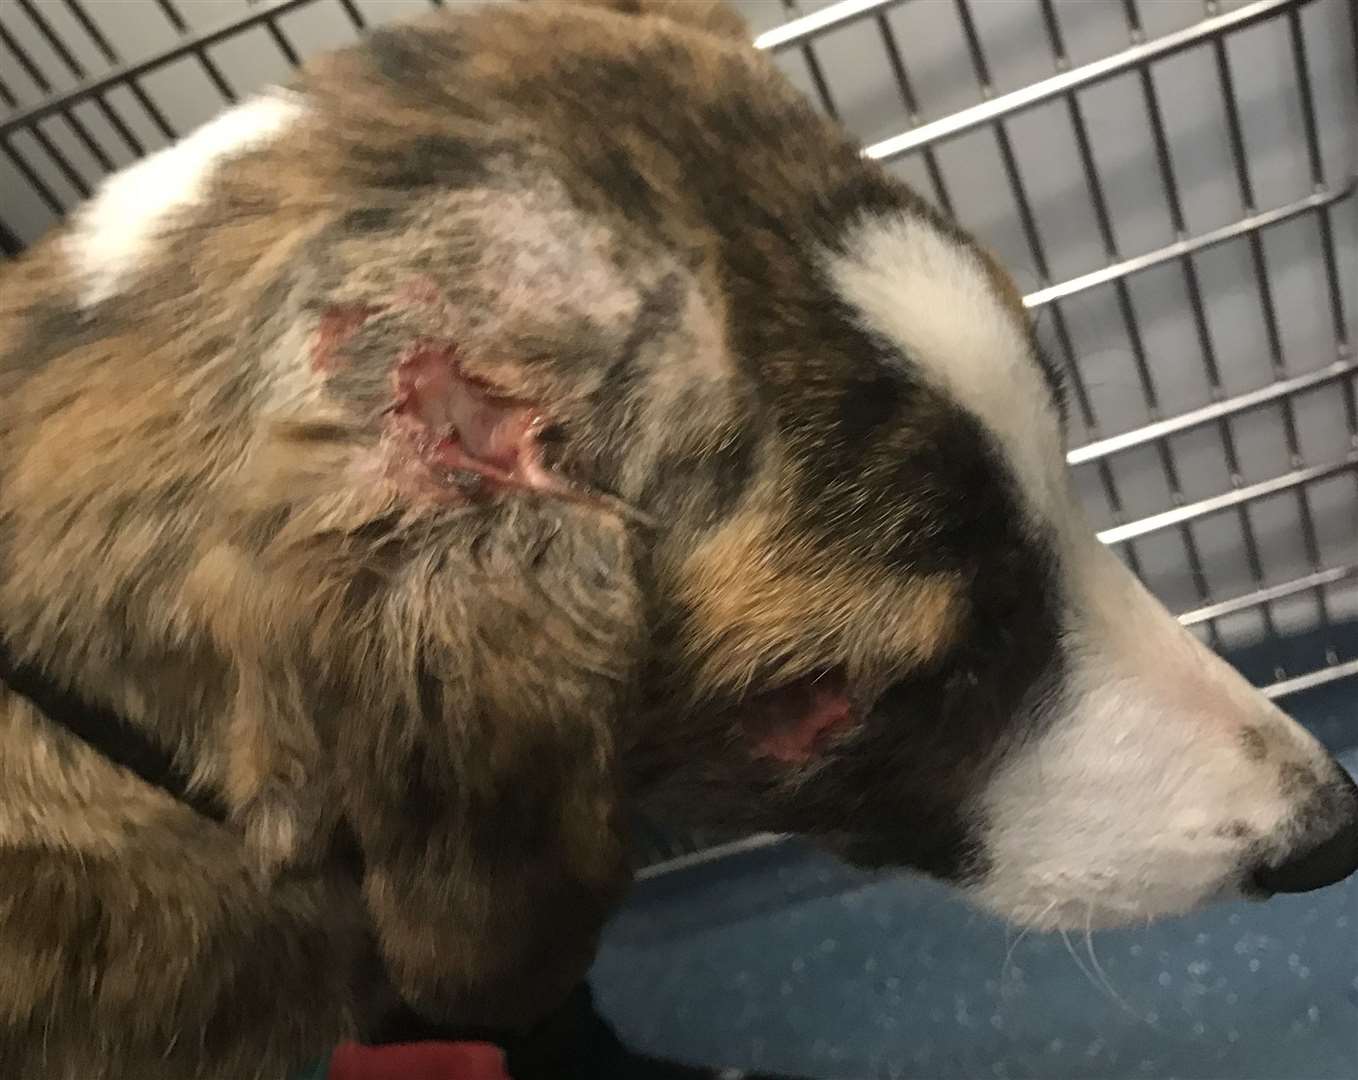 It is thought the animal may have been used in dog fighting training. Picture: RSPCA